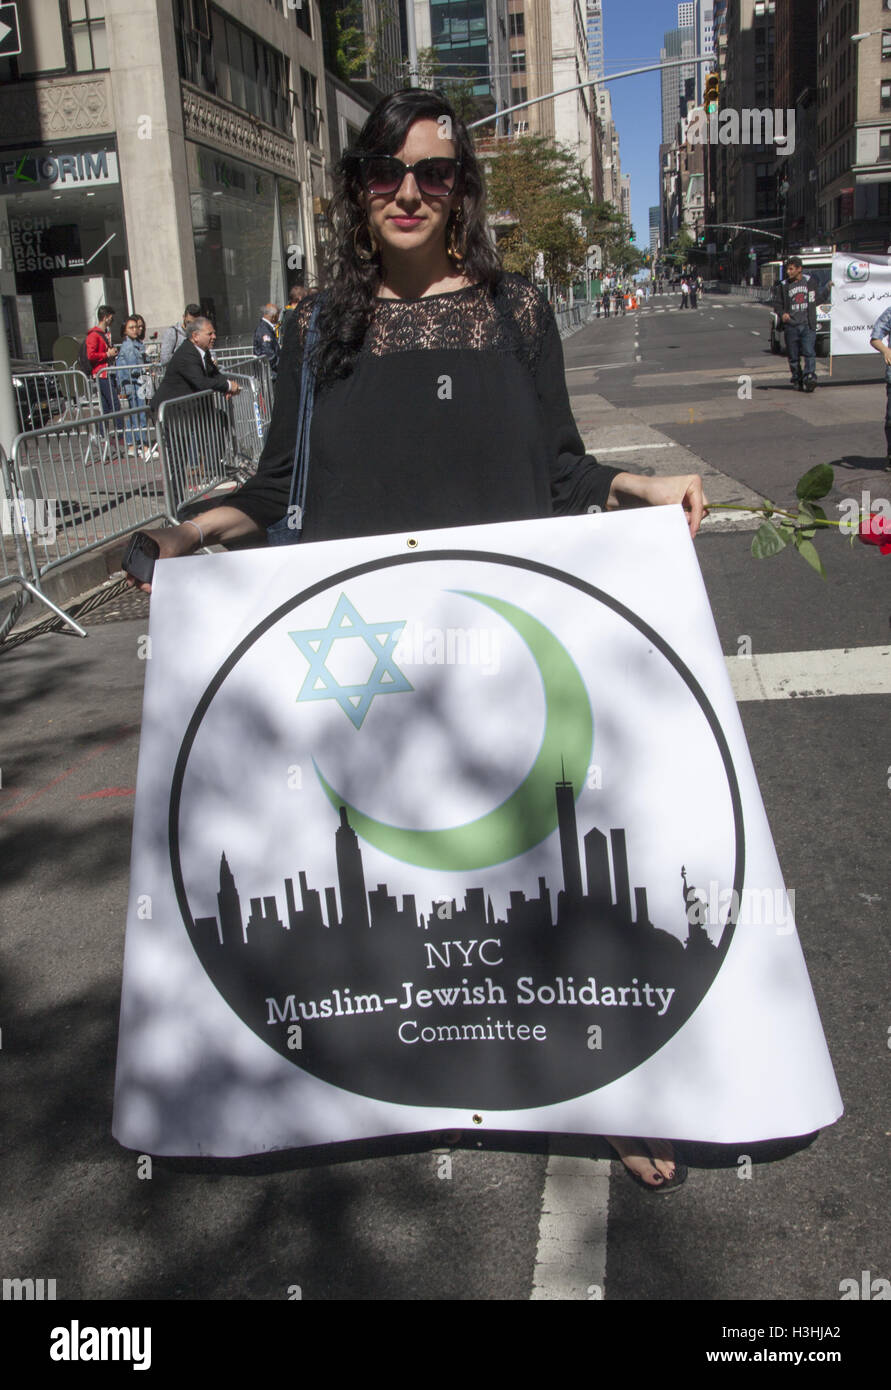 United American Muslim Day Parade on Madison Avenue in New York City. Jewish woman from Muslim-Jewish solidarity committee. Stock Photo